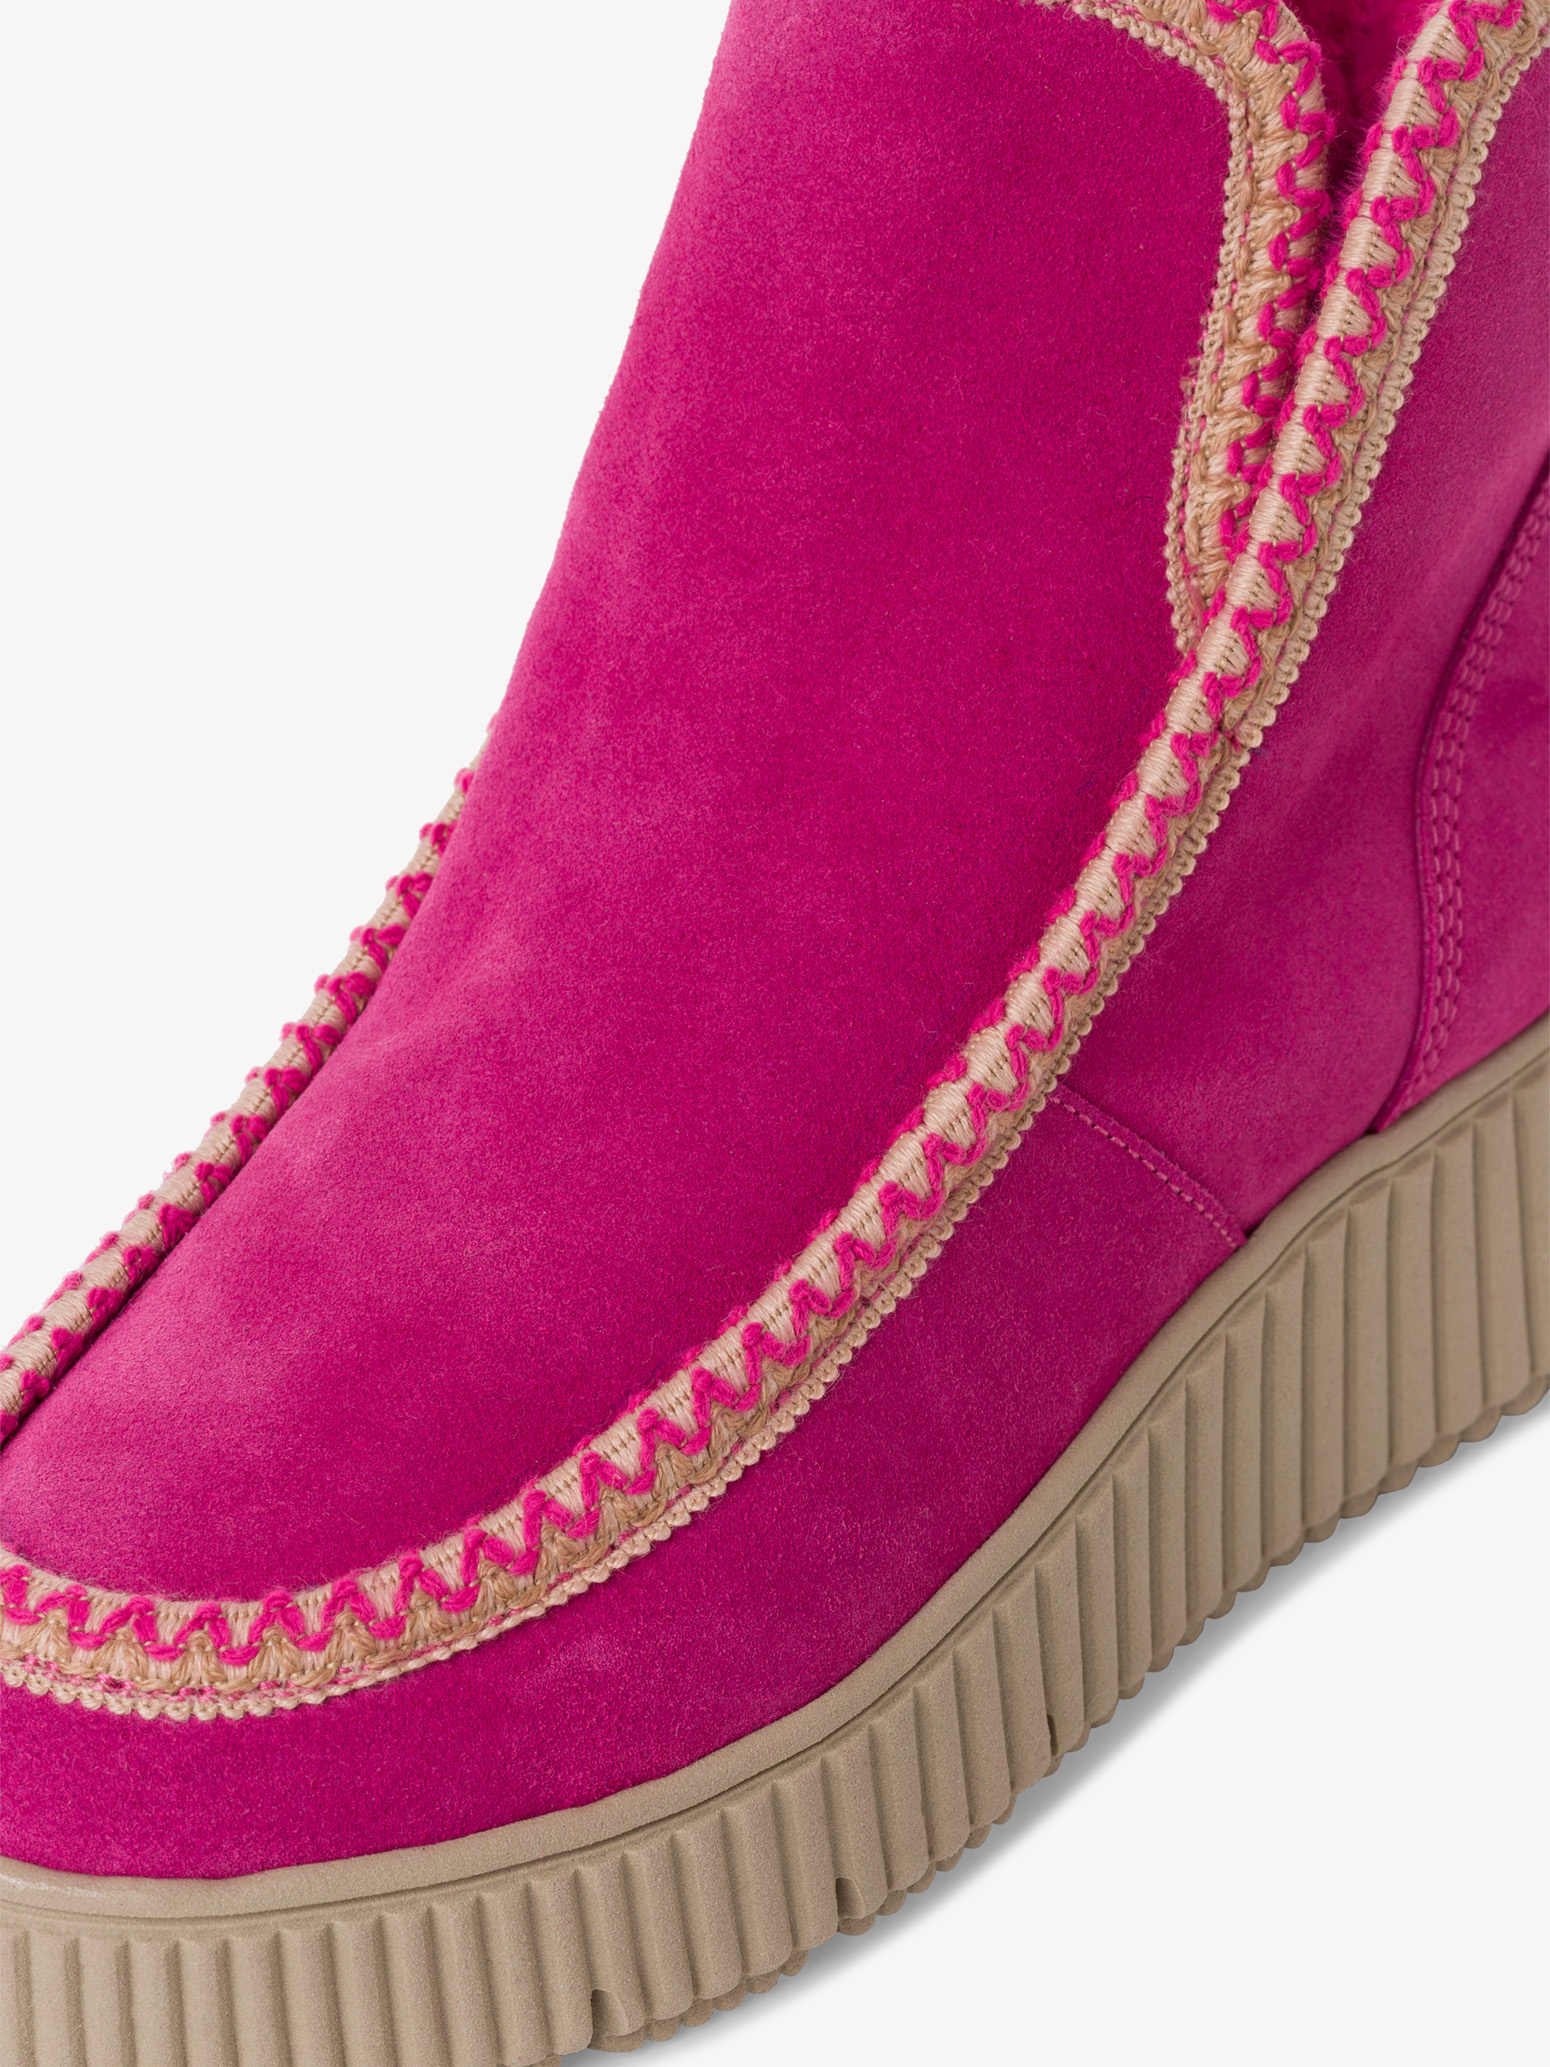 Leather Bootie - pink warm lining, FUXIA, hi-res